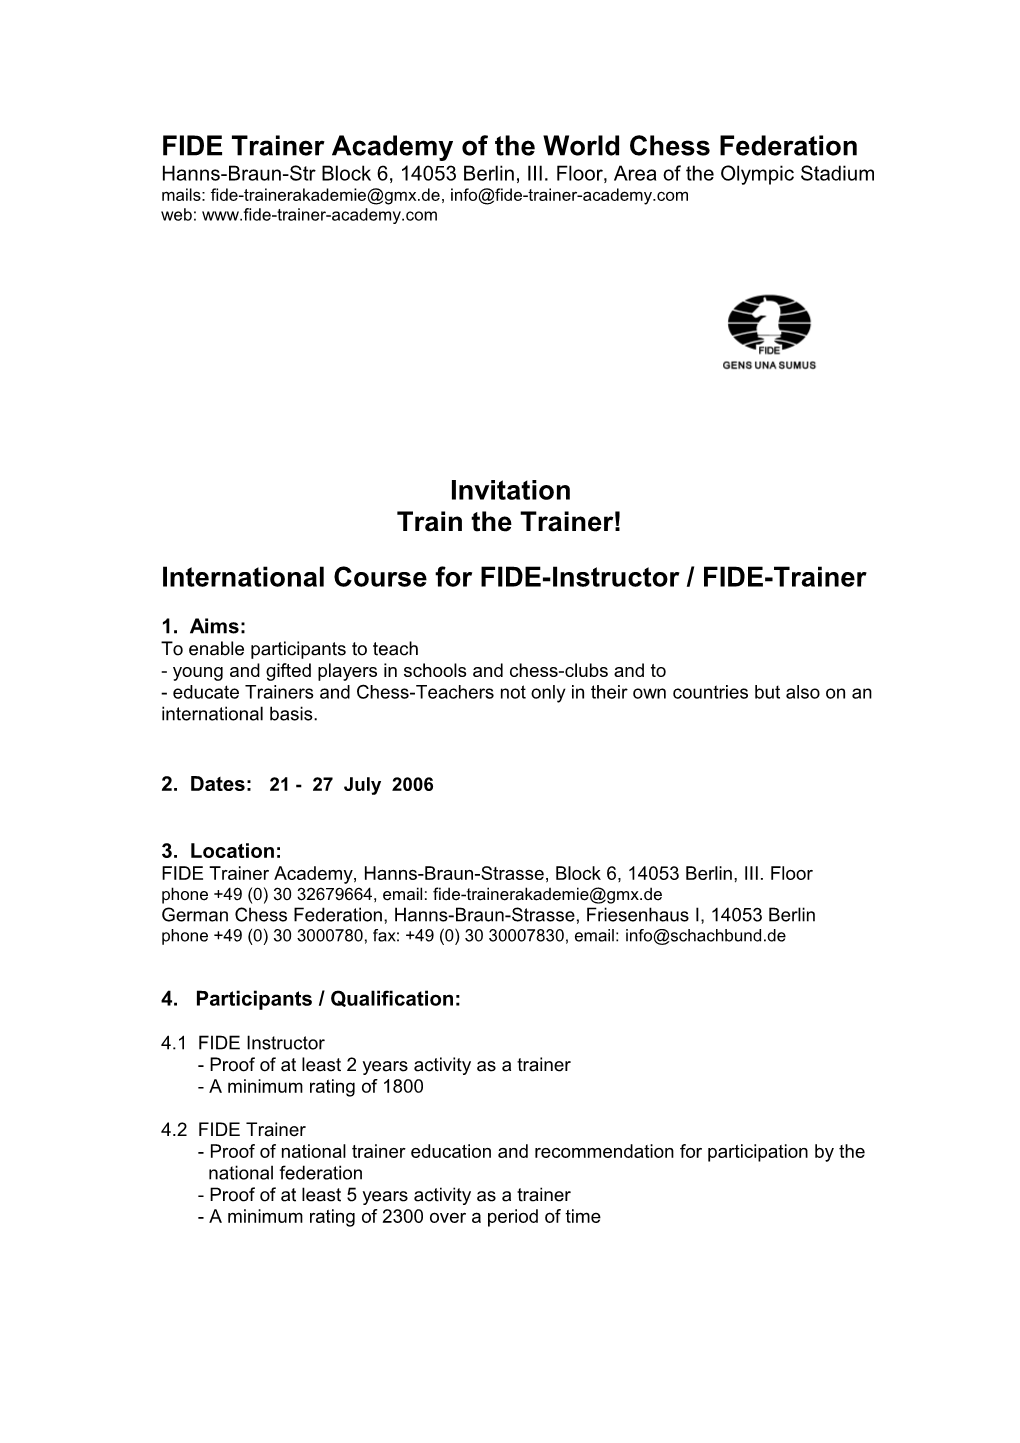 FIDE Trainer Academy of the World Chess Federation